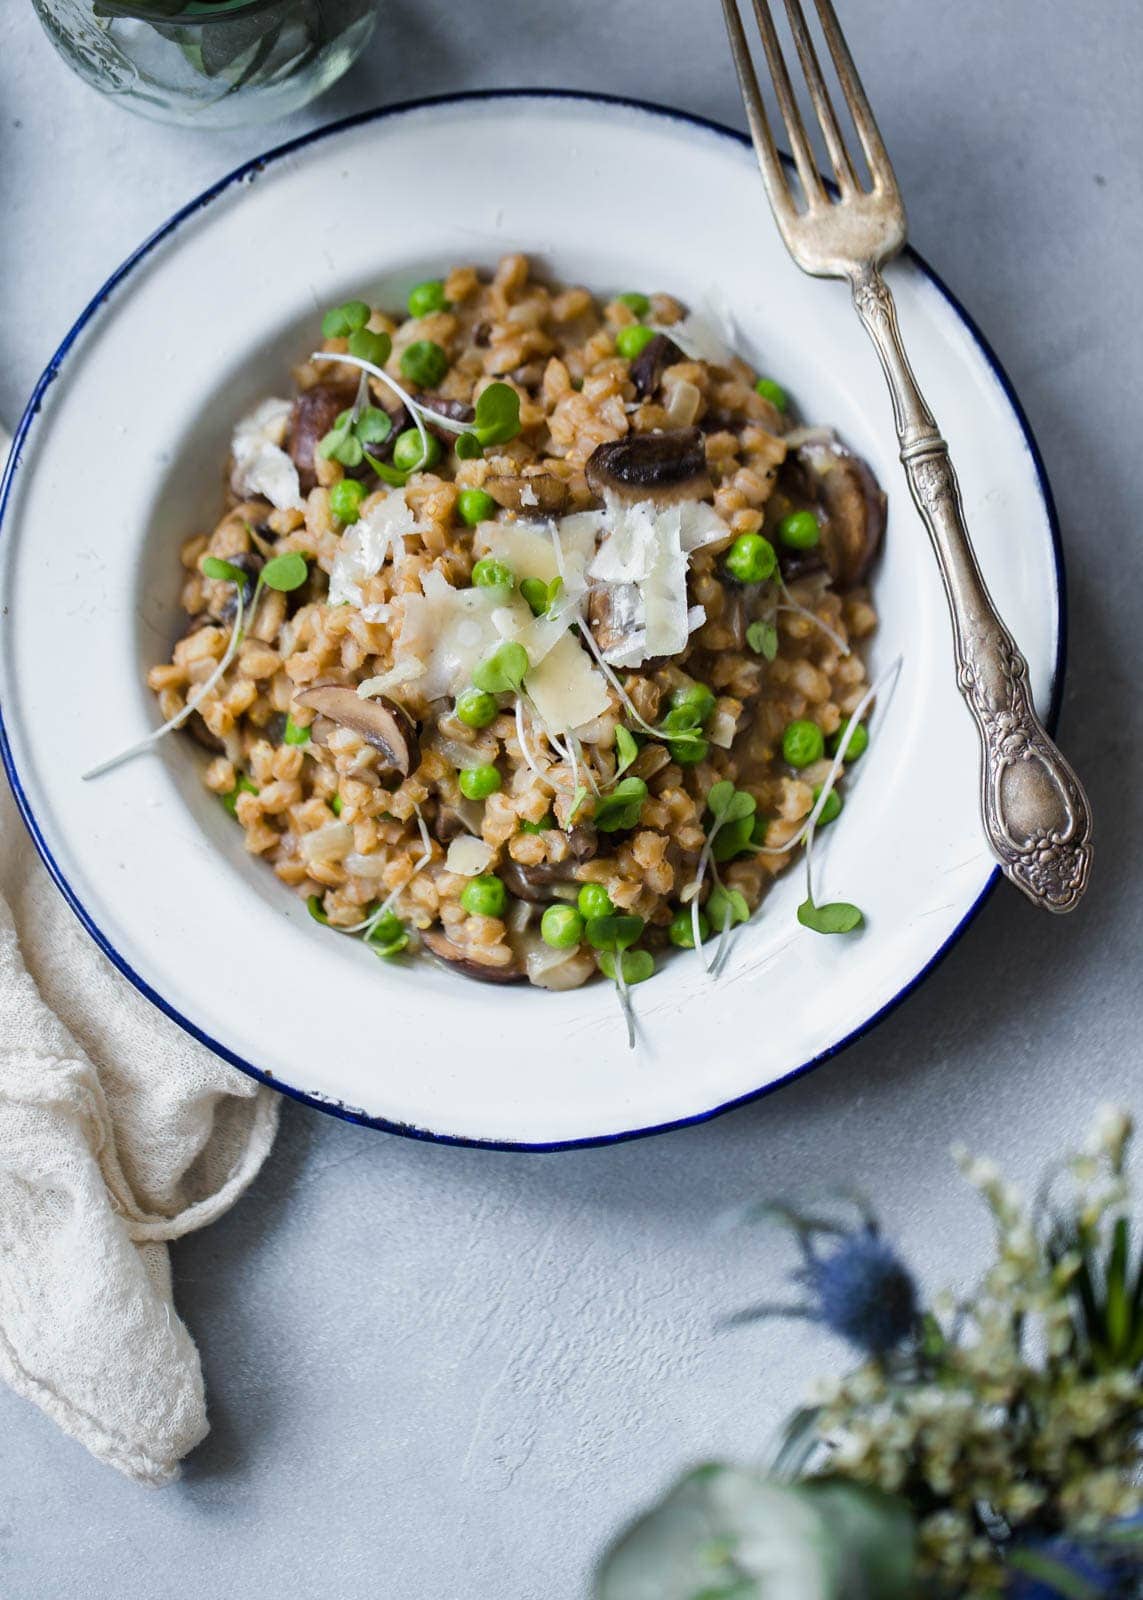 https://bromabakery.com/wp-content/uploads/2017/04/Spring-Pea-Farro-Risotto-3.jpg